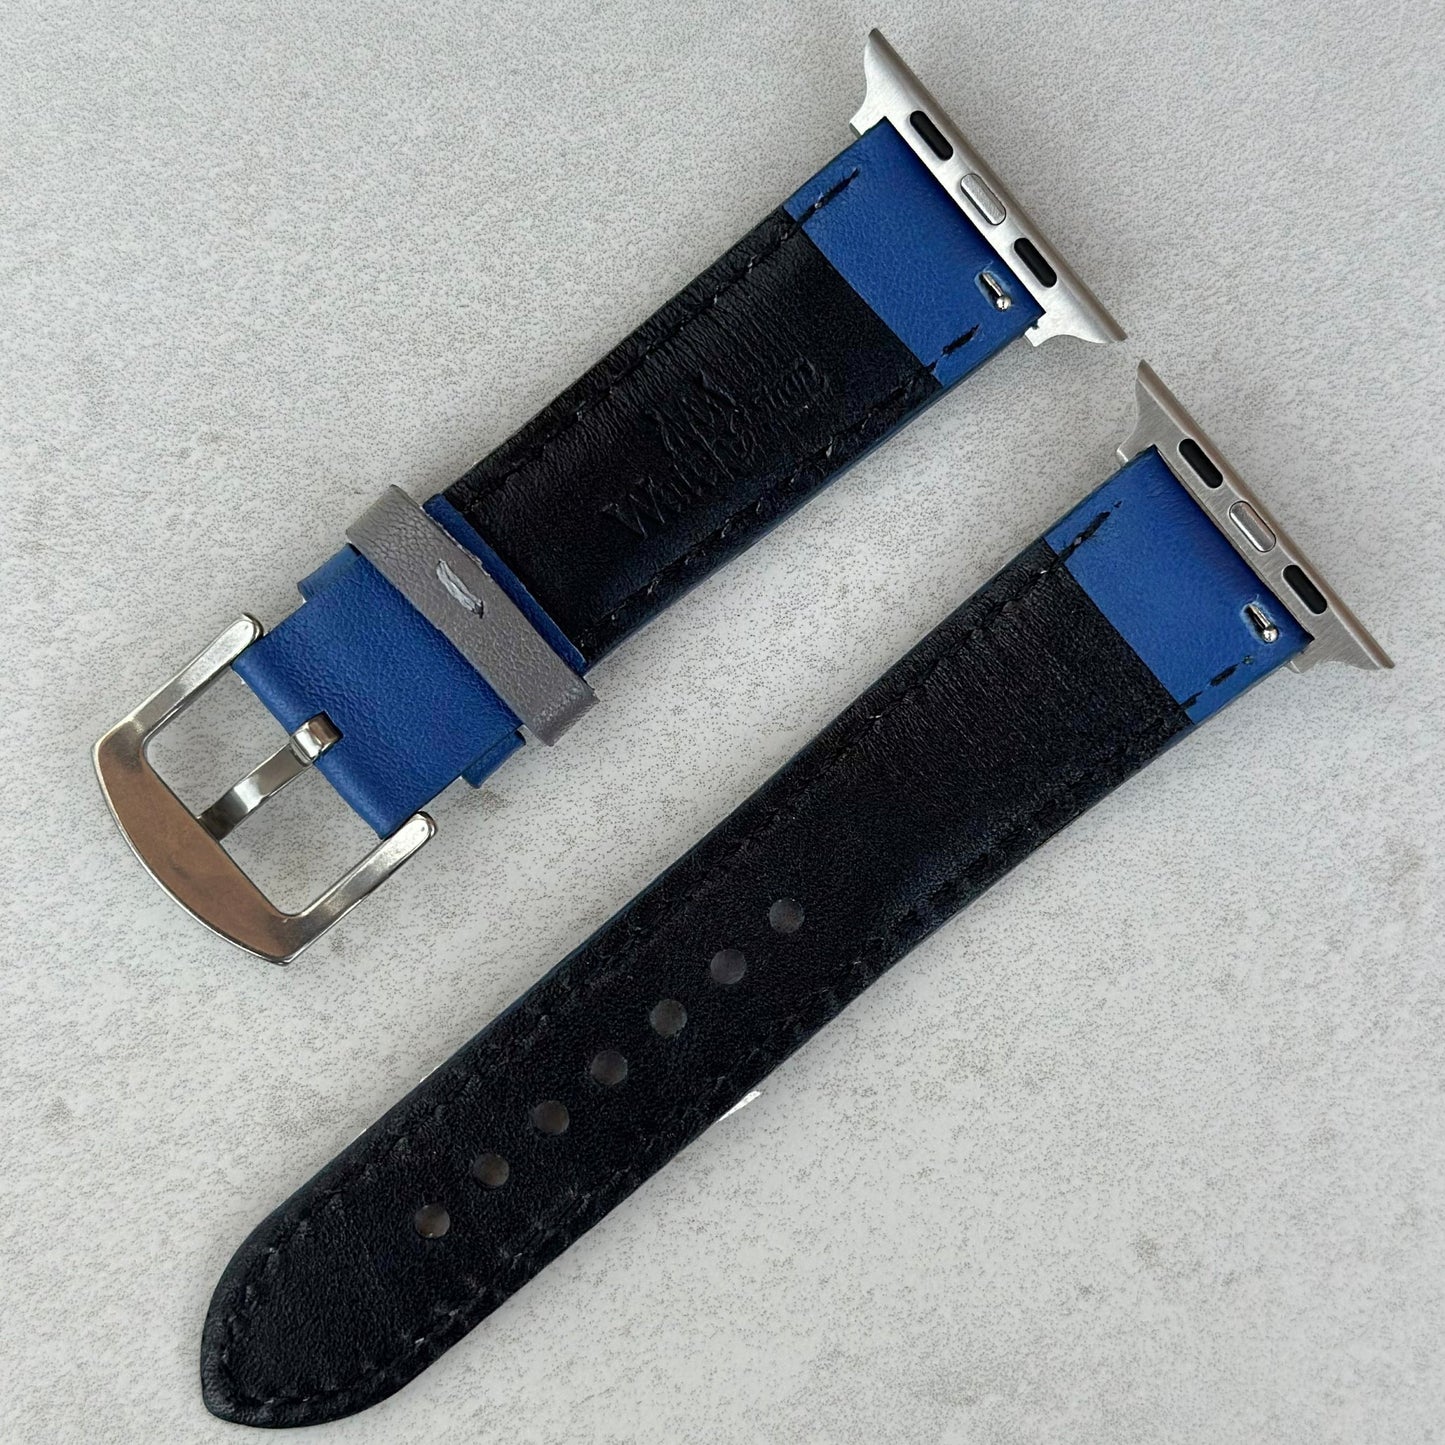 Rear of the Le Mans blue and grey full grain leather apple watch strap. Watch And Strap logo debossed.